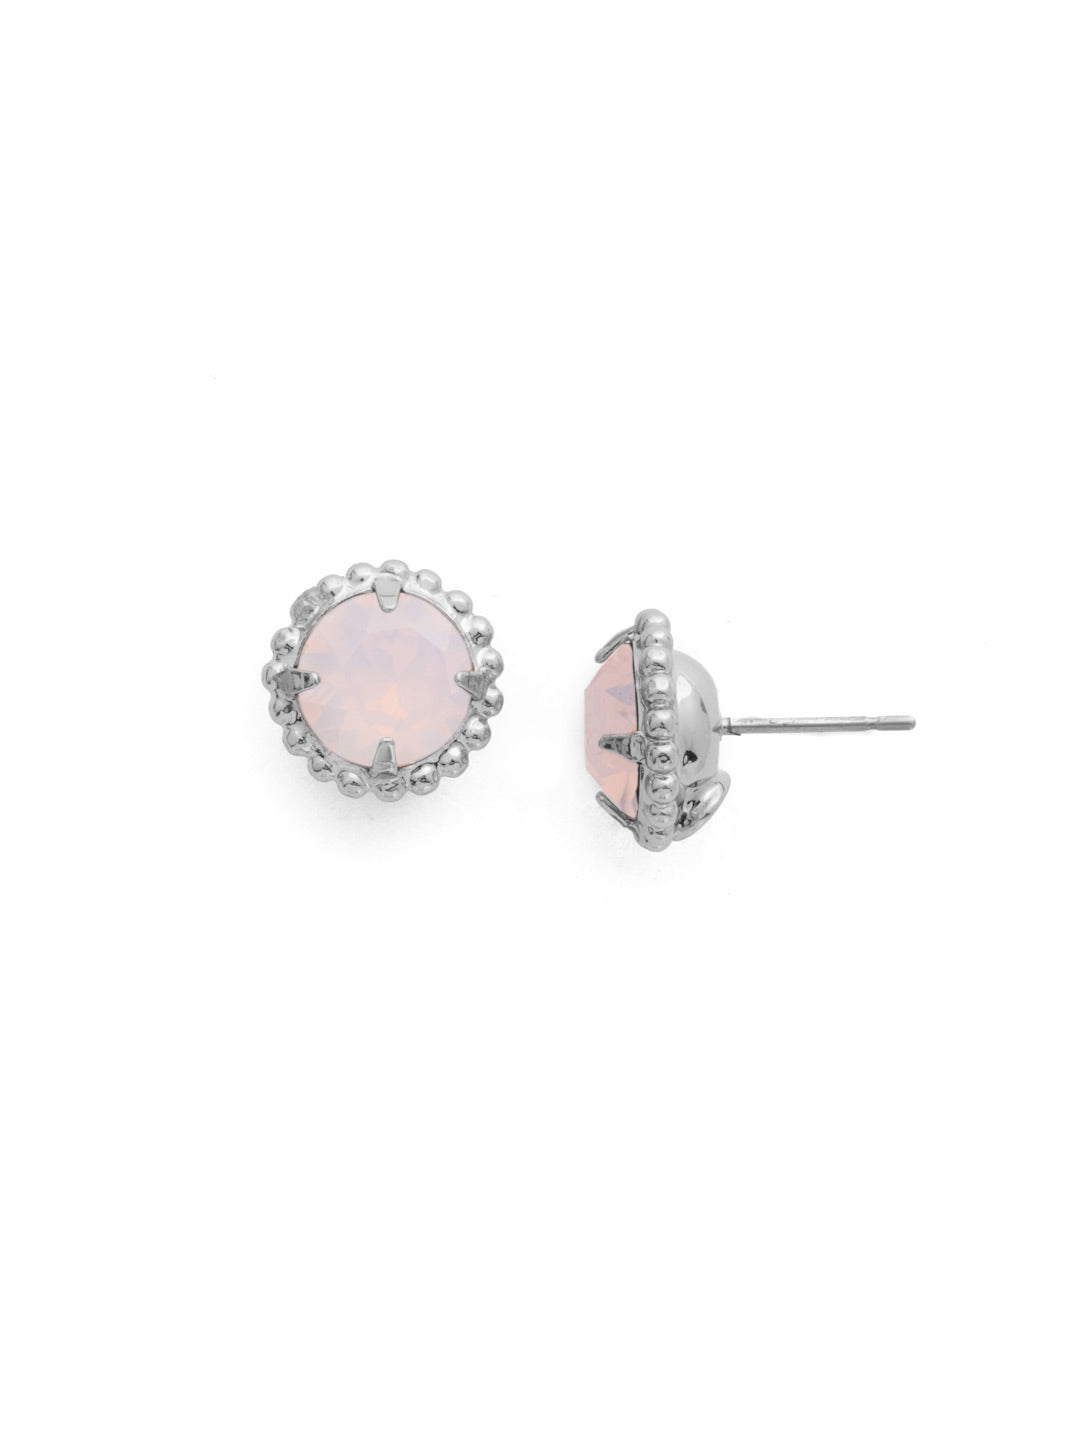 Simplicity Stud Earrings - EBY38PDROW - <p>A timeless classic, the Simplicity Stud Earrings feature round cut crystals in a variety of colors; accented with a halo of metal beaded detail. Need help picking a stud? <a href="https://www.sorrelli.com/blogs/sisterhood/round-stud-earrings-101-a-rundown-of-sizes-styles-and-sparkle">Check out our size guide!</a> From Sorrelli's Rose Water collection in our Palladium finish.</p>